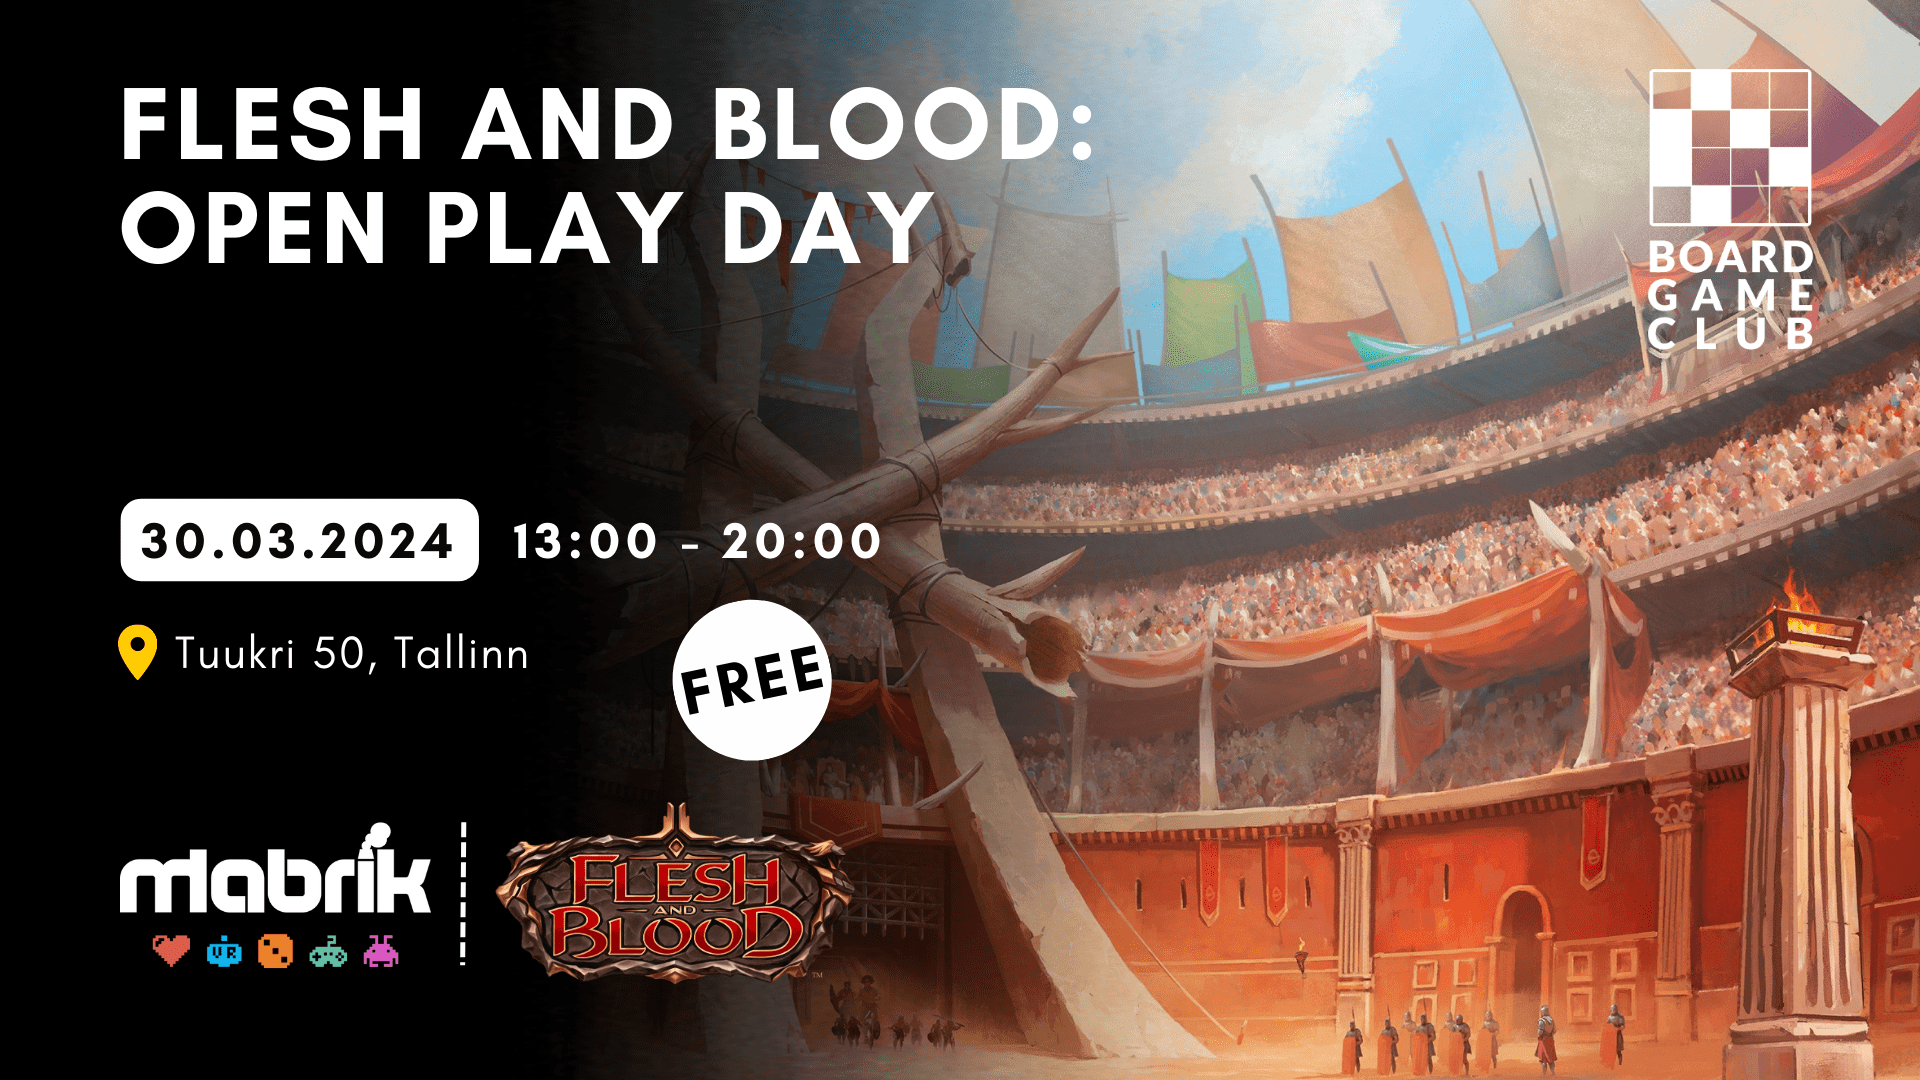 Events - 30.03.2024 - Flesh and Blood Open Play Day